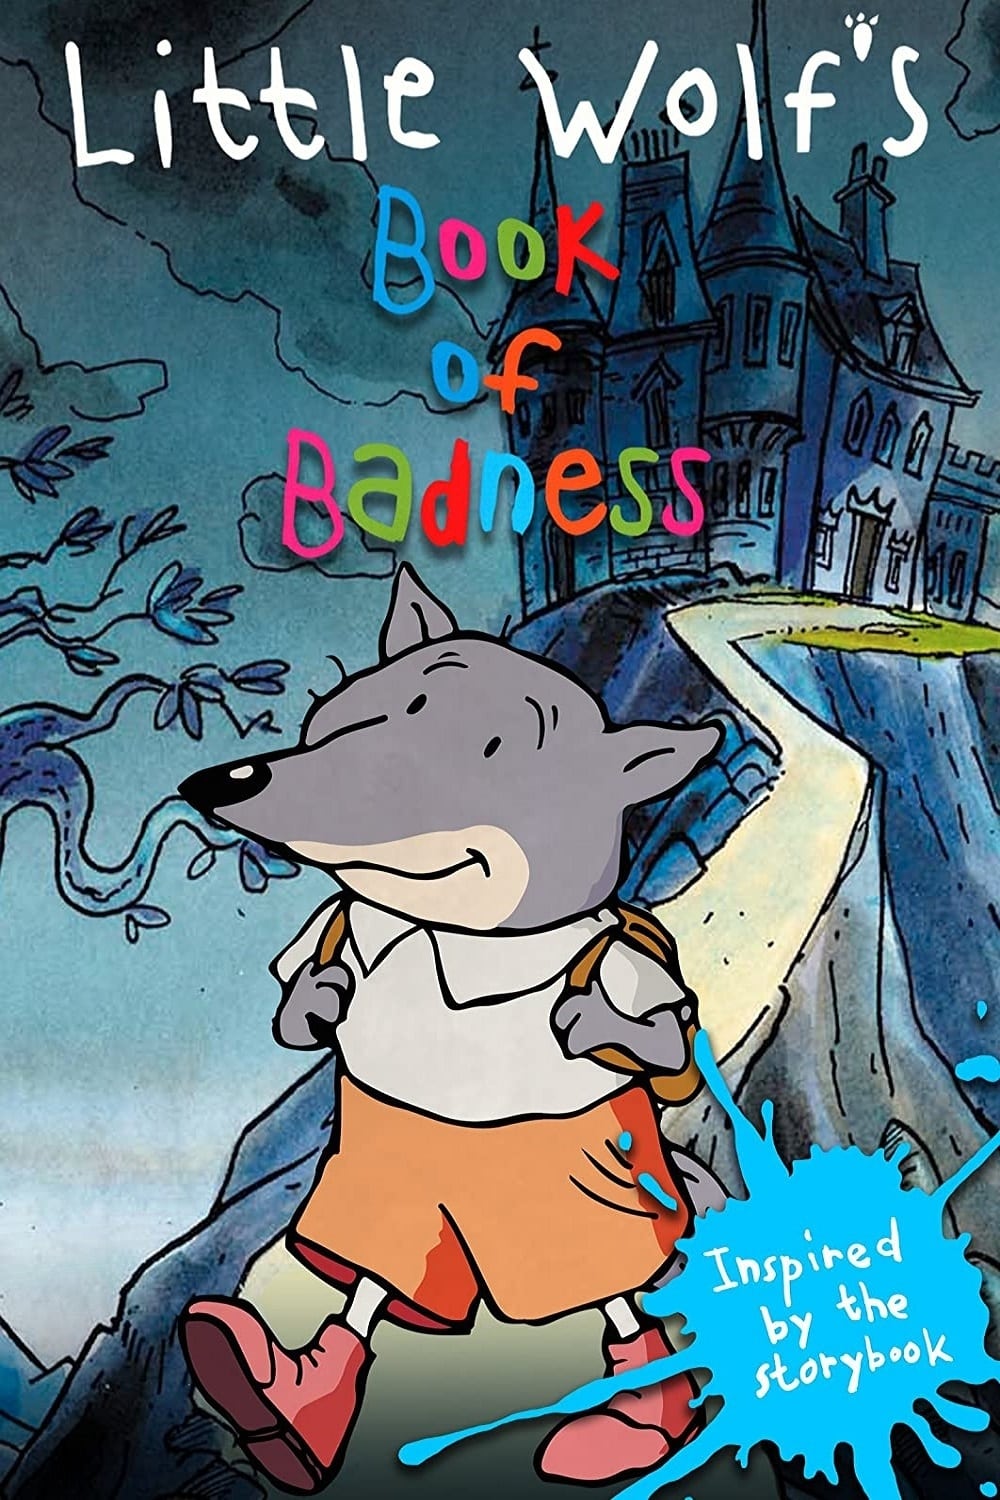 Little Wolf's Book of Badness (2003)